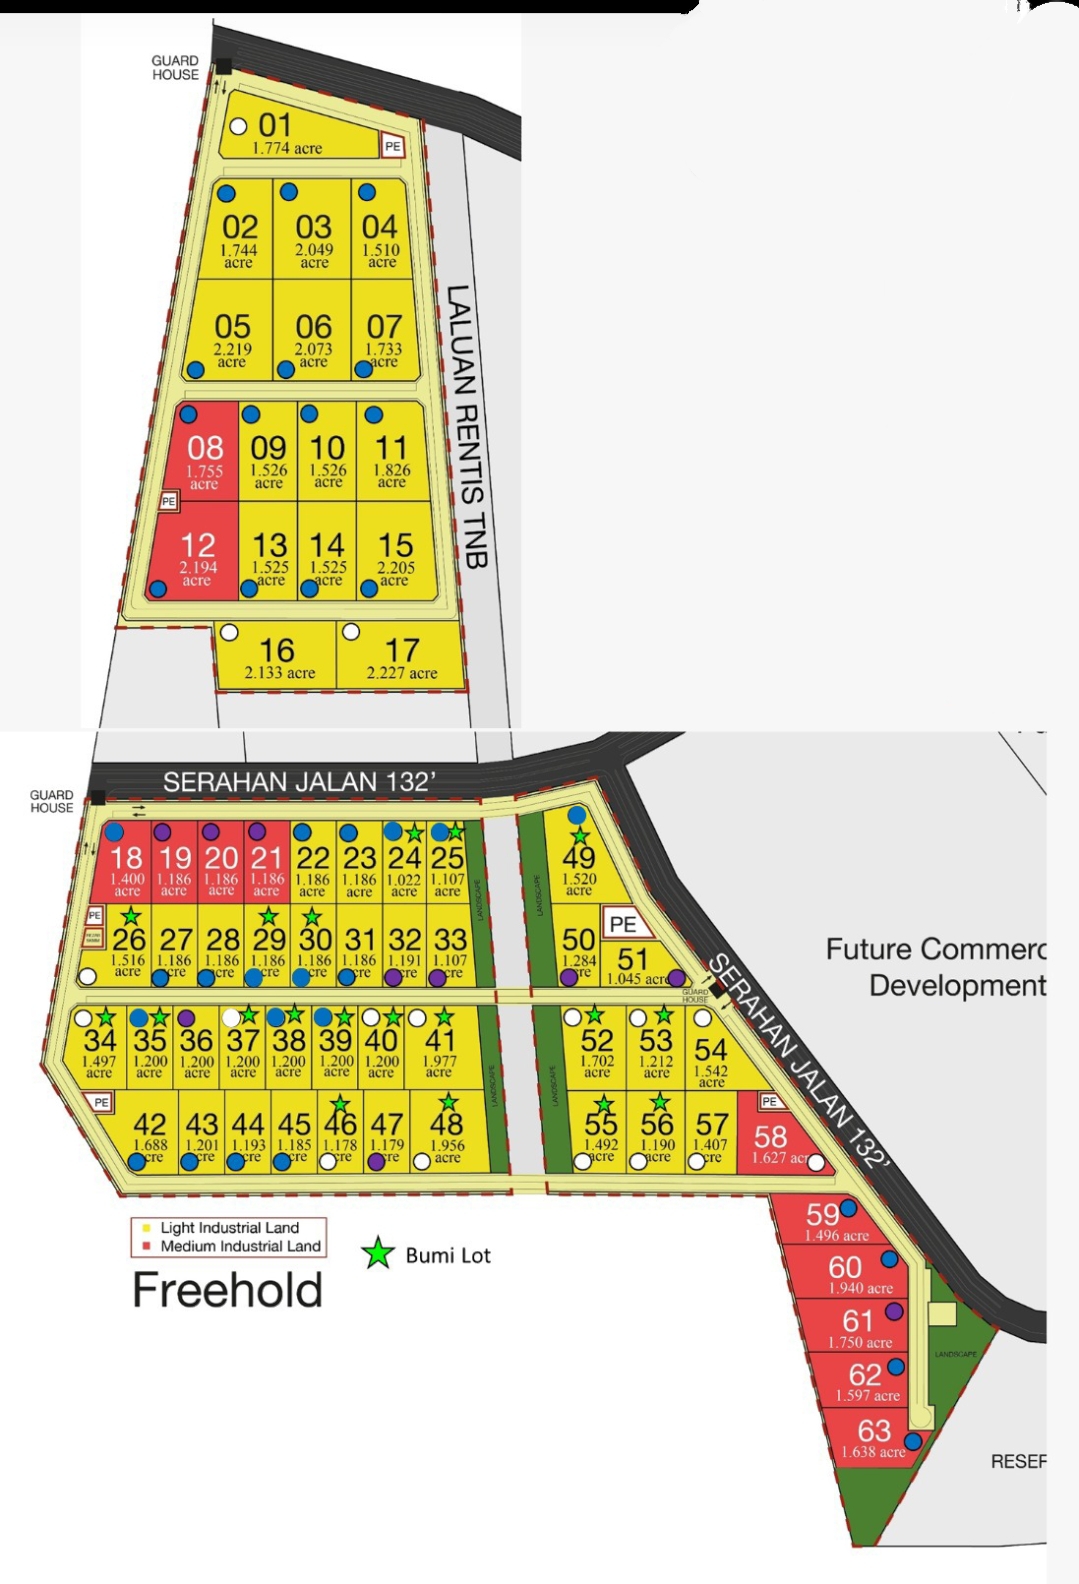 Factory Industrial Land Plots For Sale in Port Dickson – up to 2.2 acres